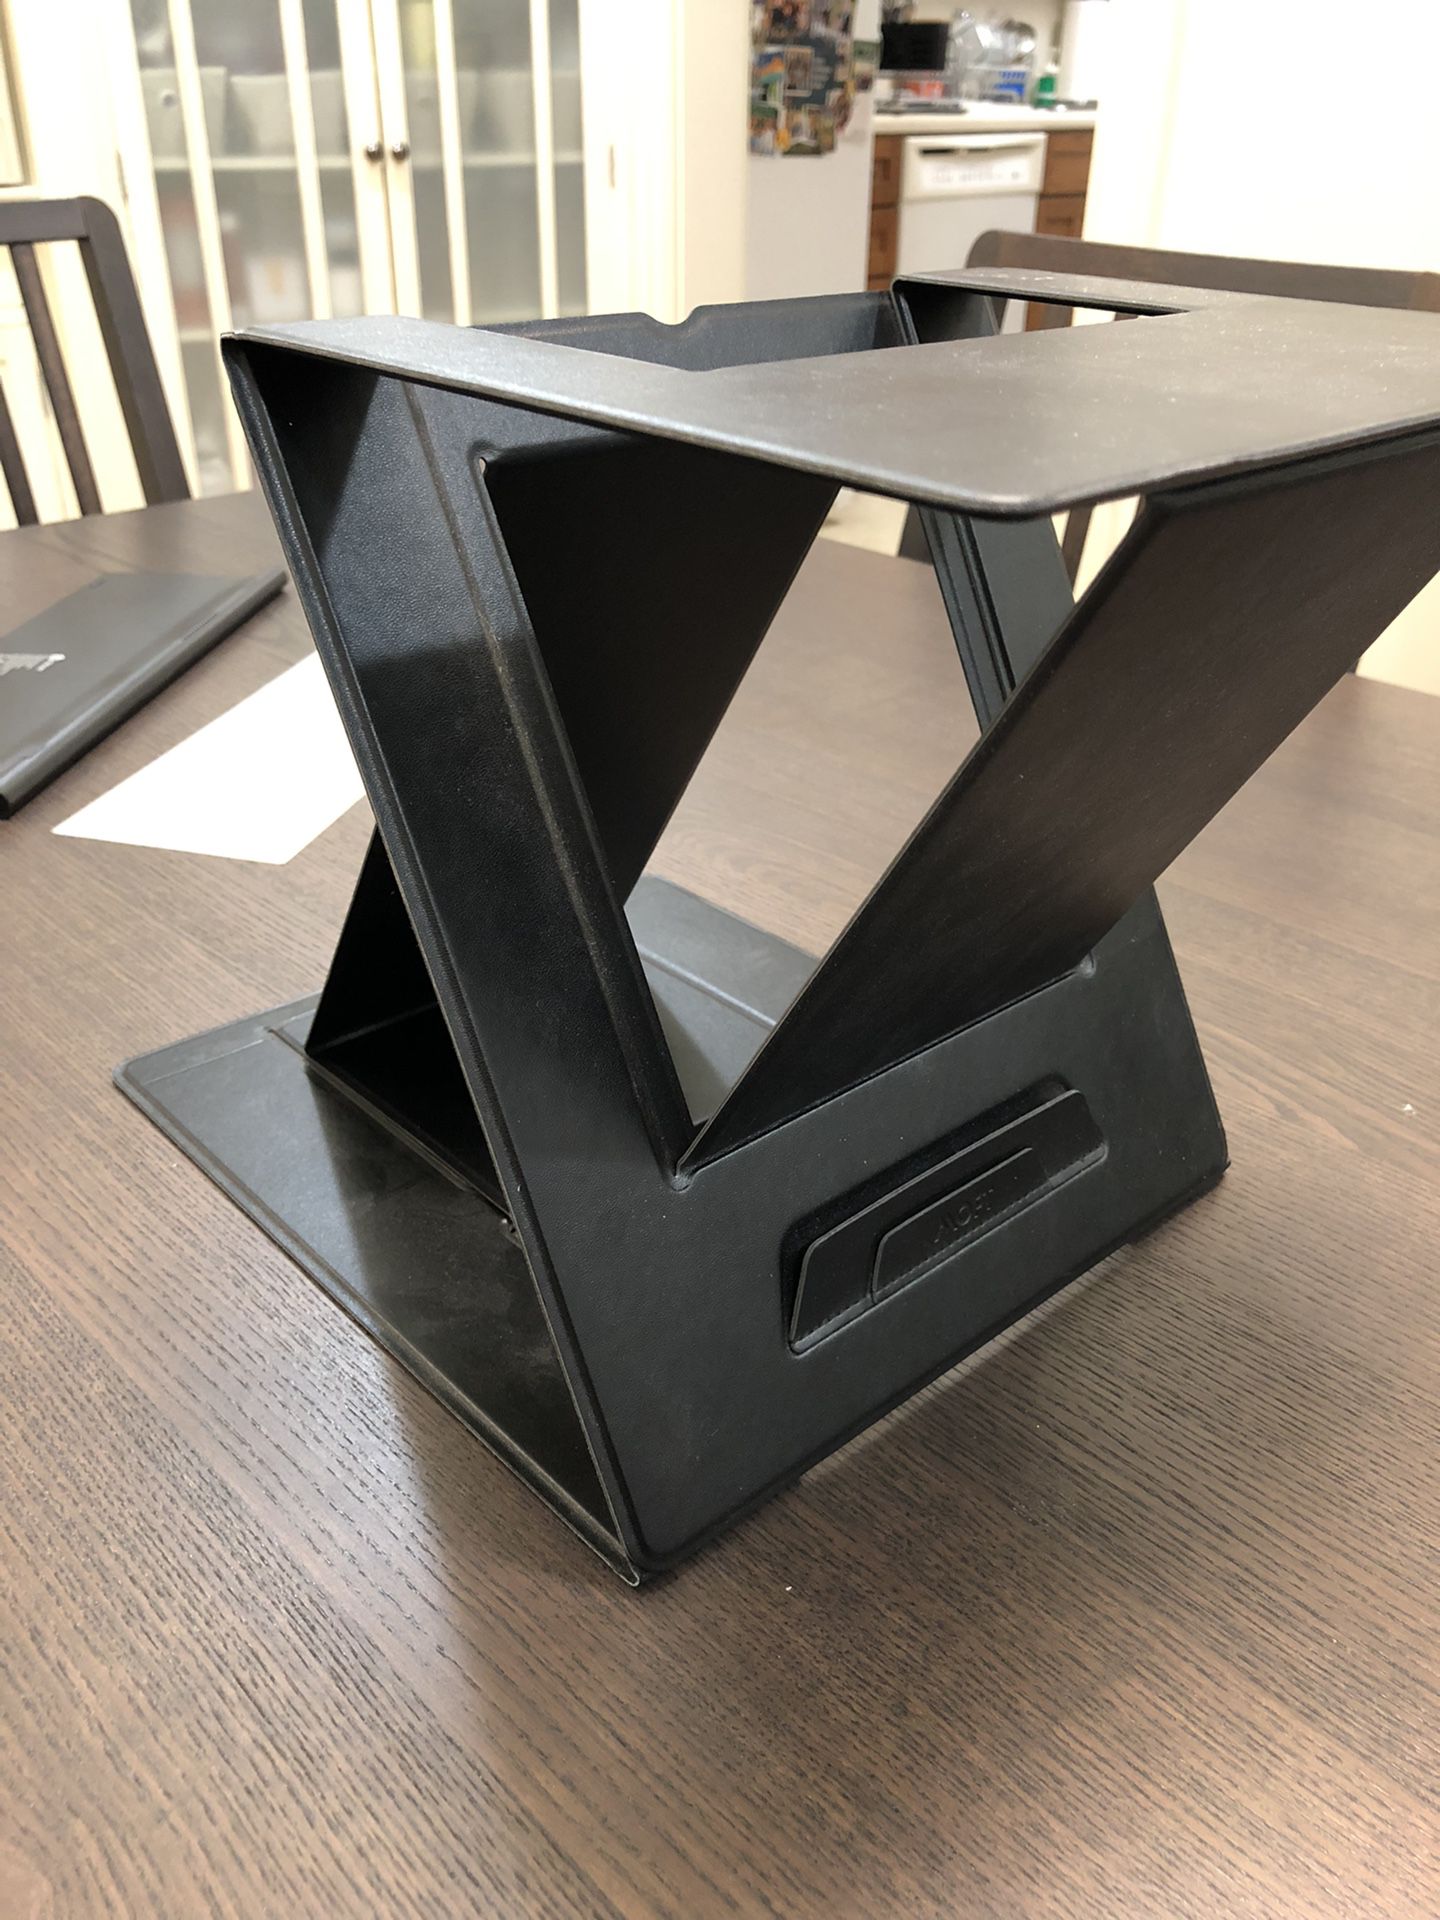 MOFT portable laptop stand